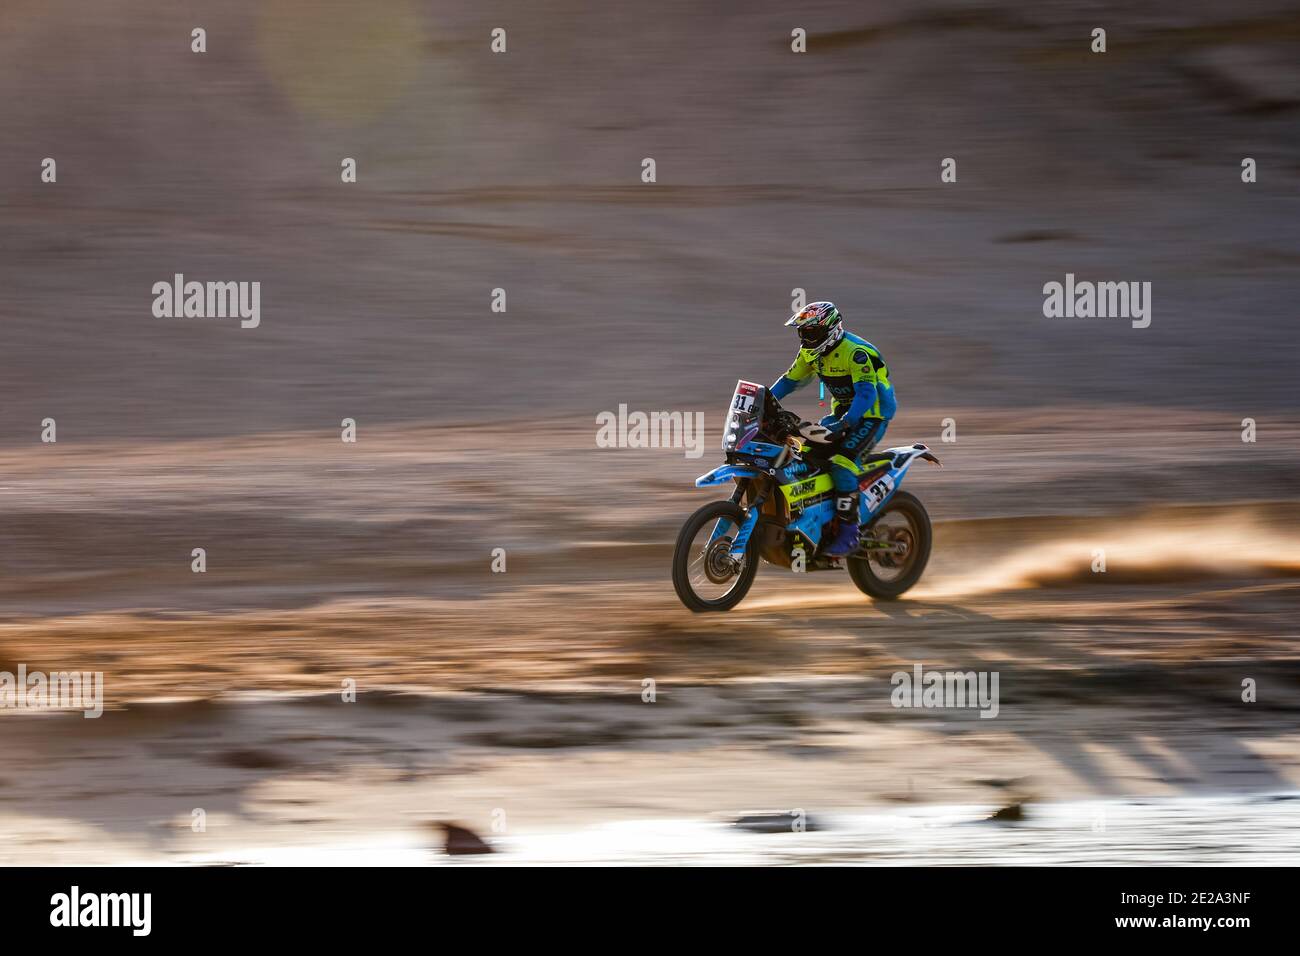 31 Michek Martin (cze), KTM, Orion - Moto Racing Group (MRG), Moto, Bike, action during the 9th stage of the Dakar 2021 betwe / LM Stock Photo